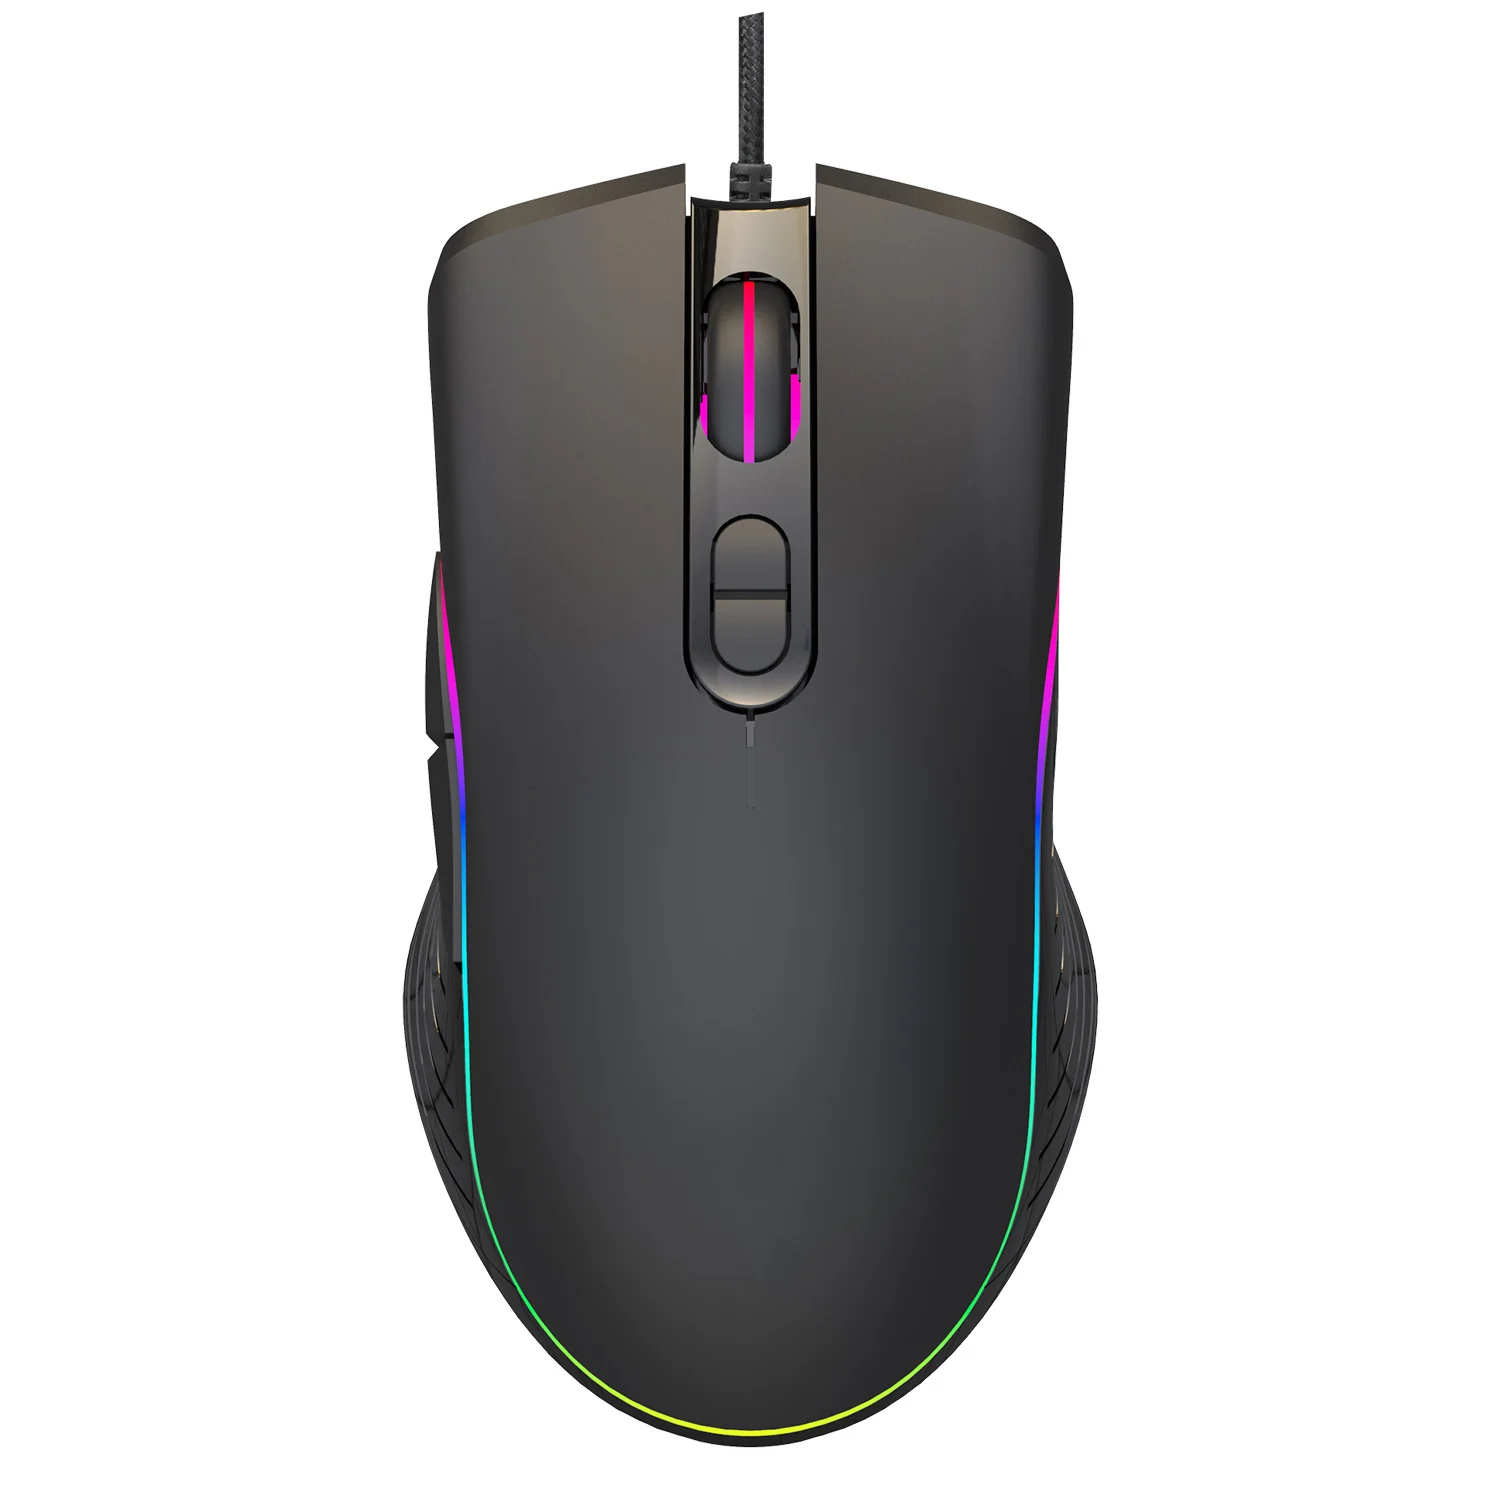 

7 buttons, 6 kinds of light patterns, DPI, 4 gears, adjustable up to 6400 ergonomically designed new RGB game mouse